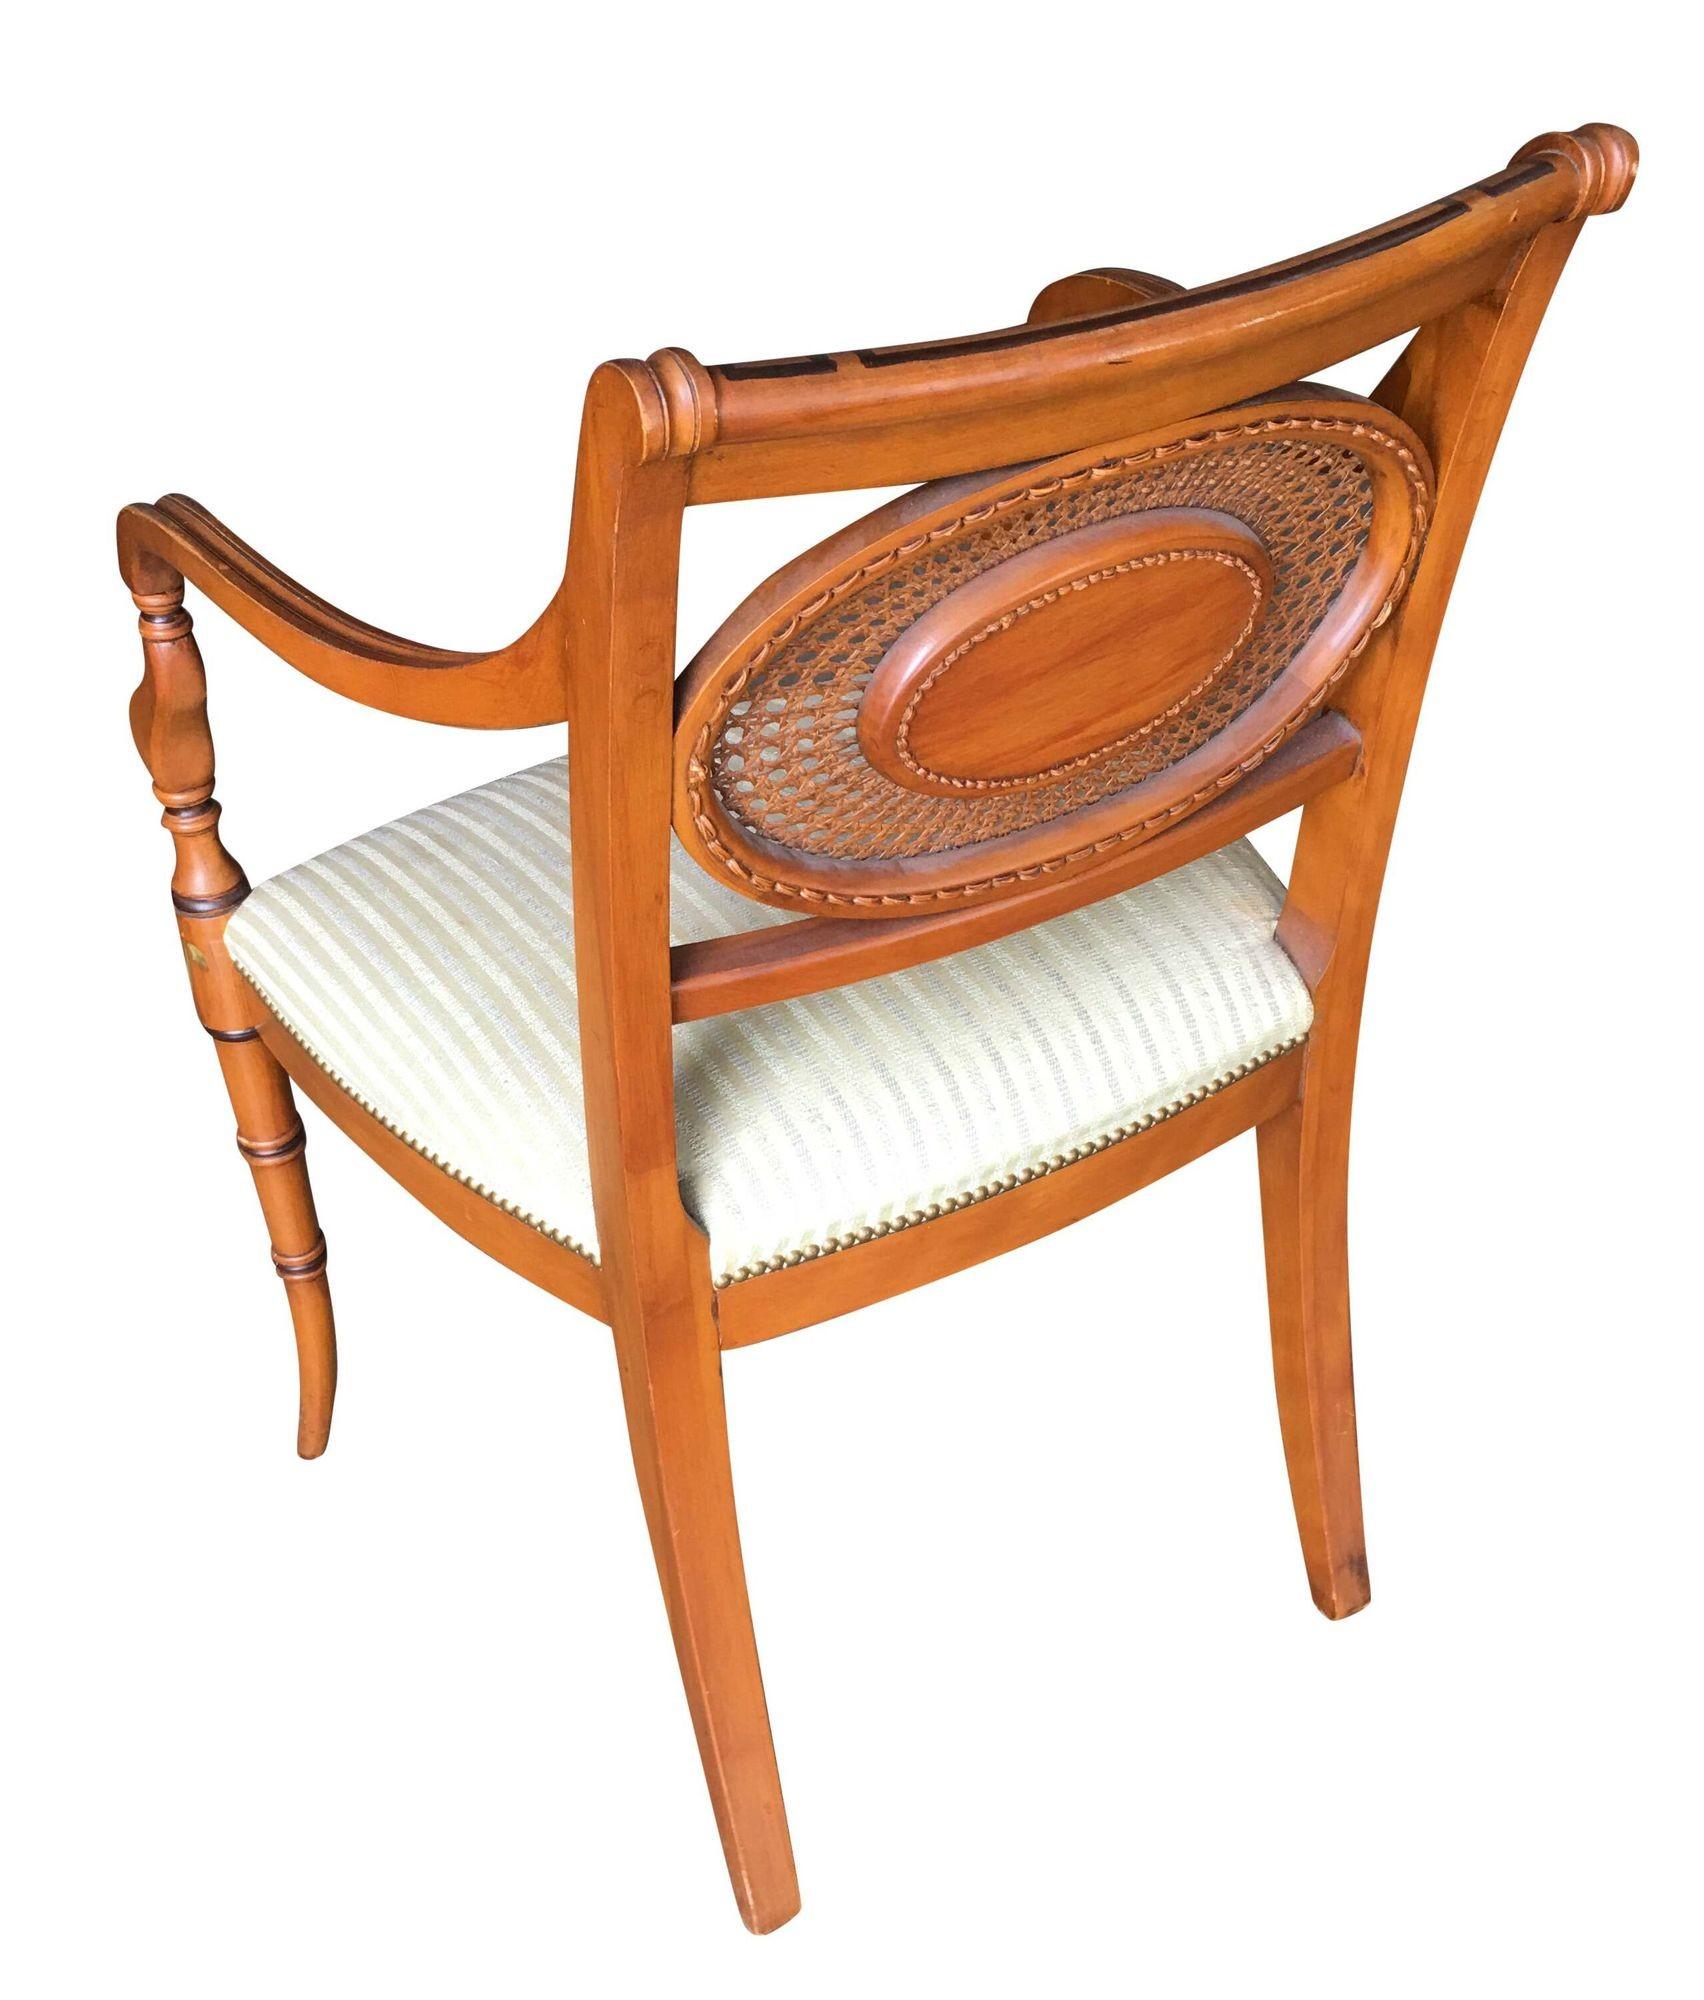 Neoclassical French Neoclassic Dining Chair with Hand-Painted Woven Wicker Back For Sale